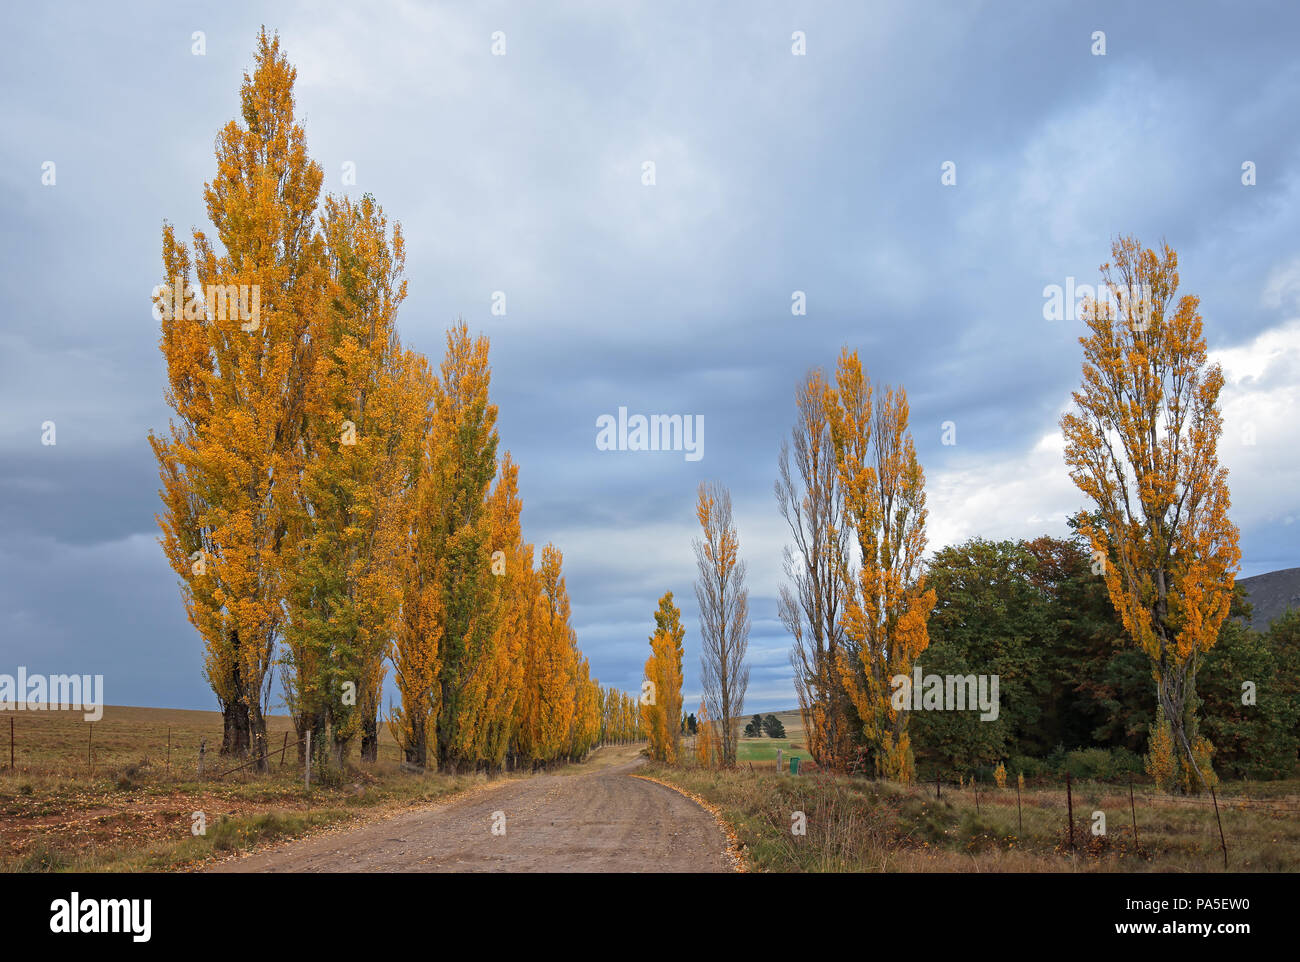 Rural road and colorful poplar trees during autumn (fall), South Africa Stock Photo